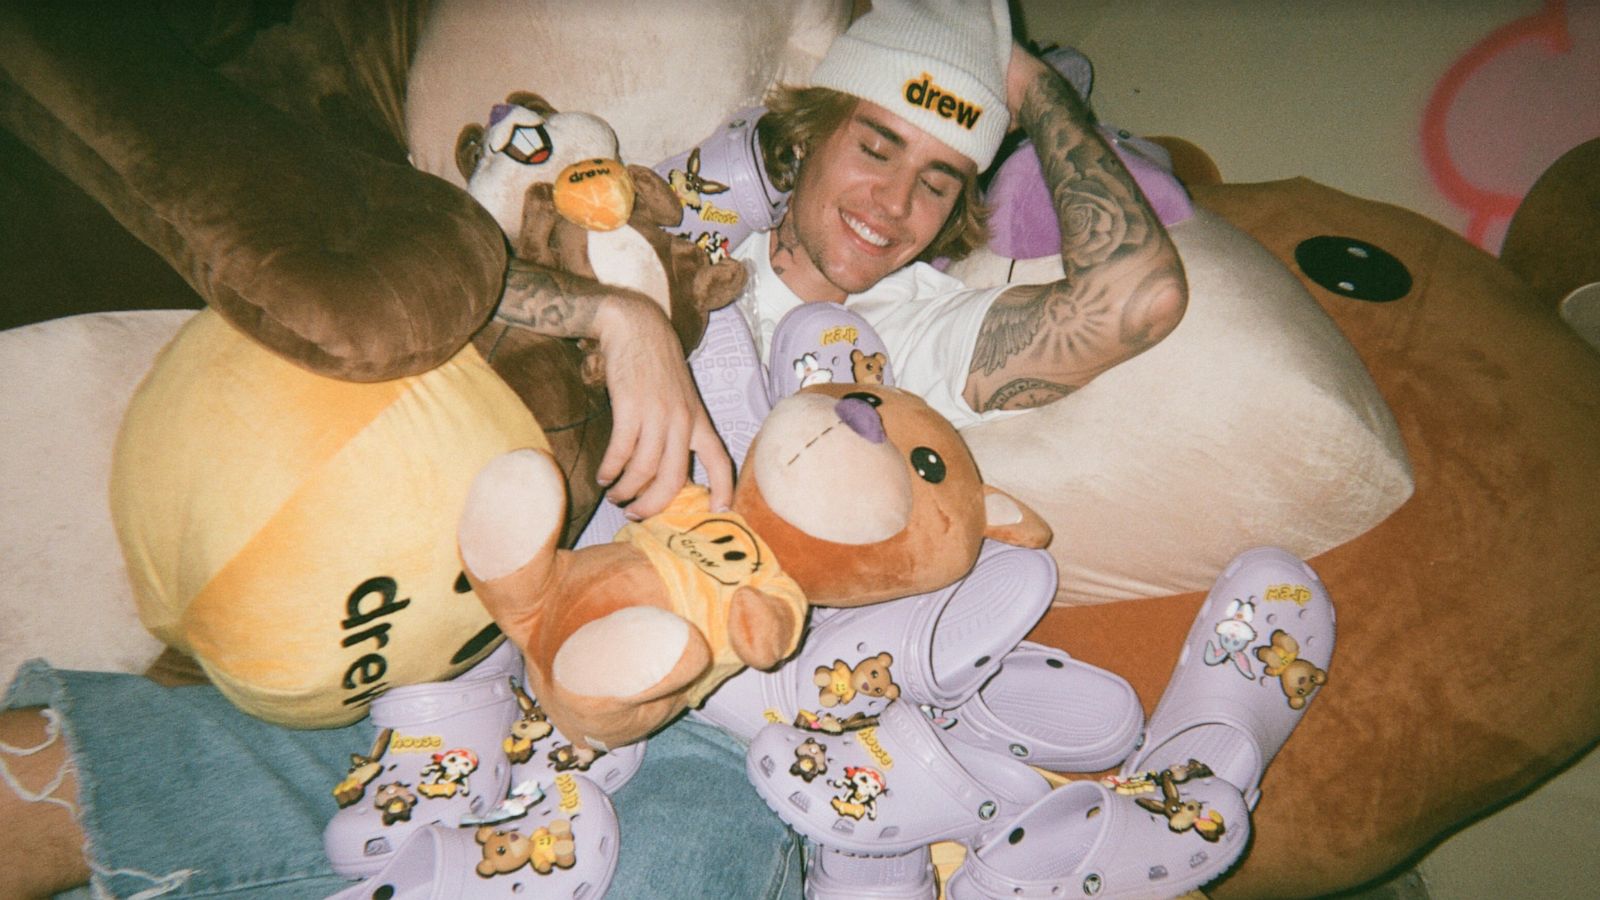 Justin Bieber's Drew House clothing line has arrived and people